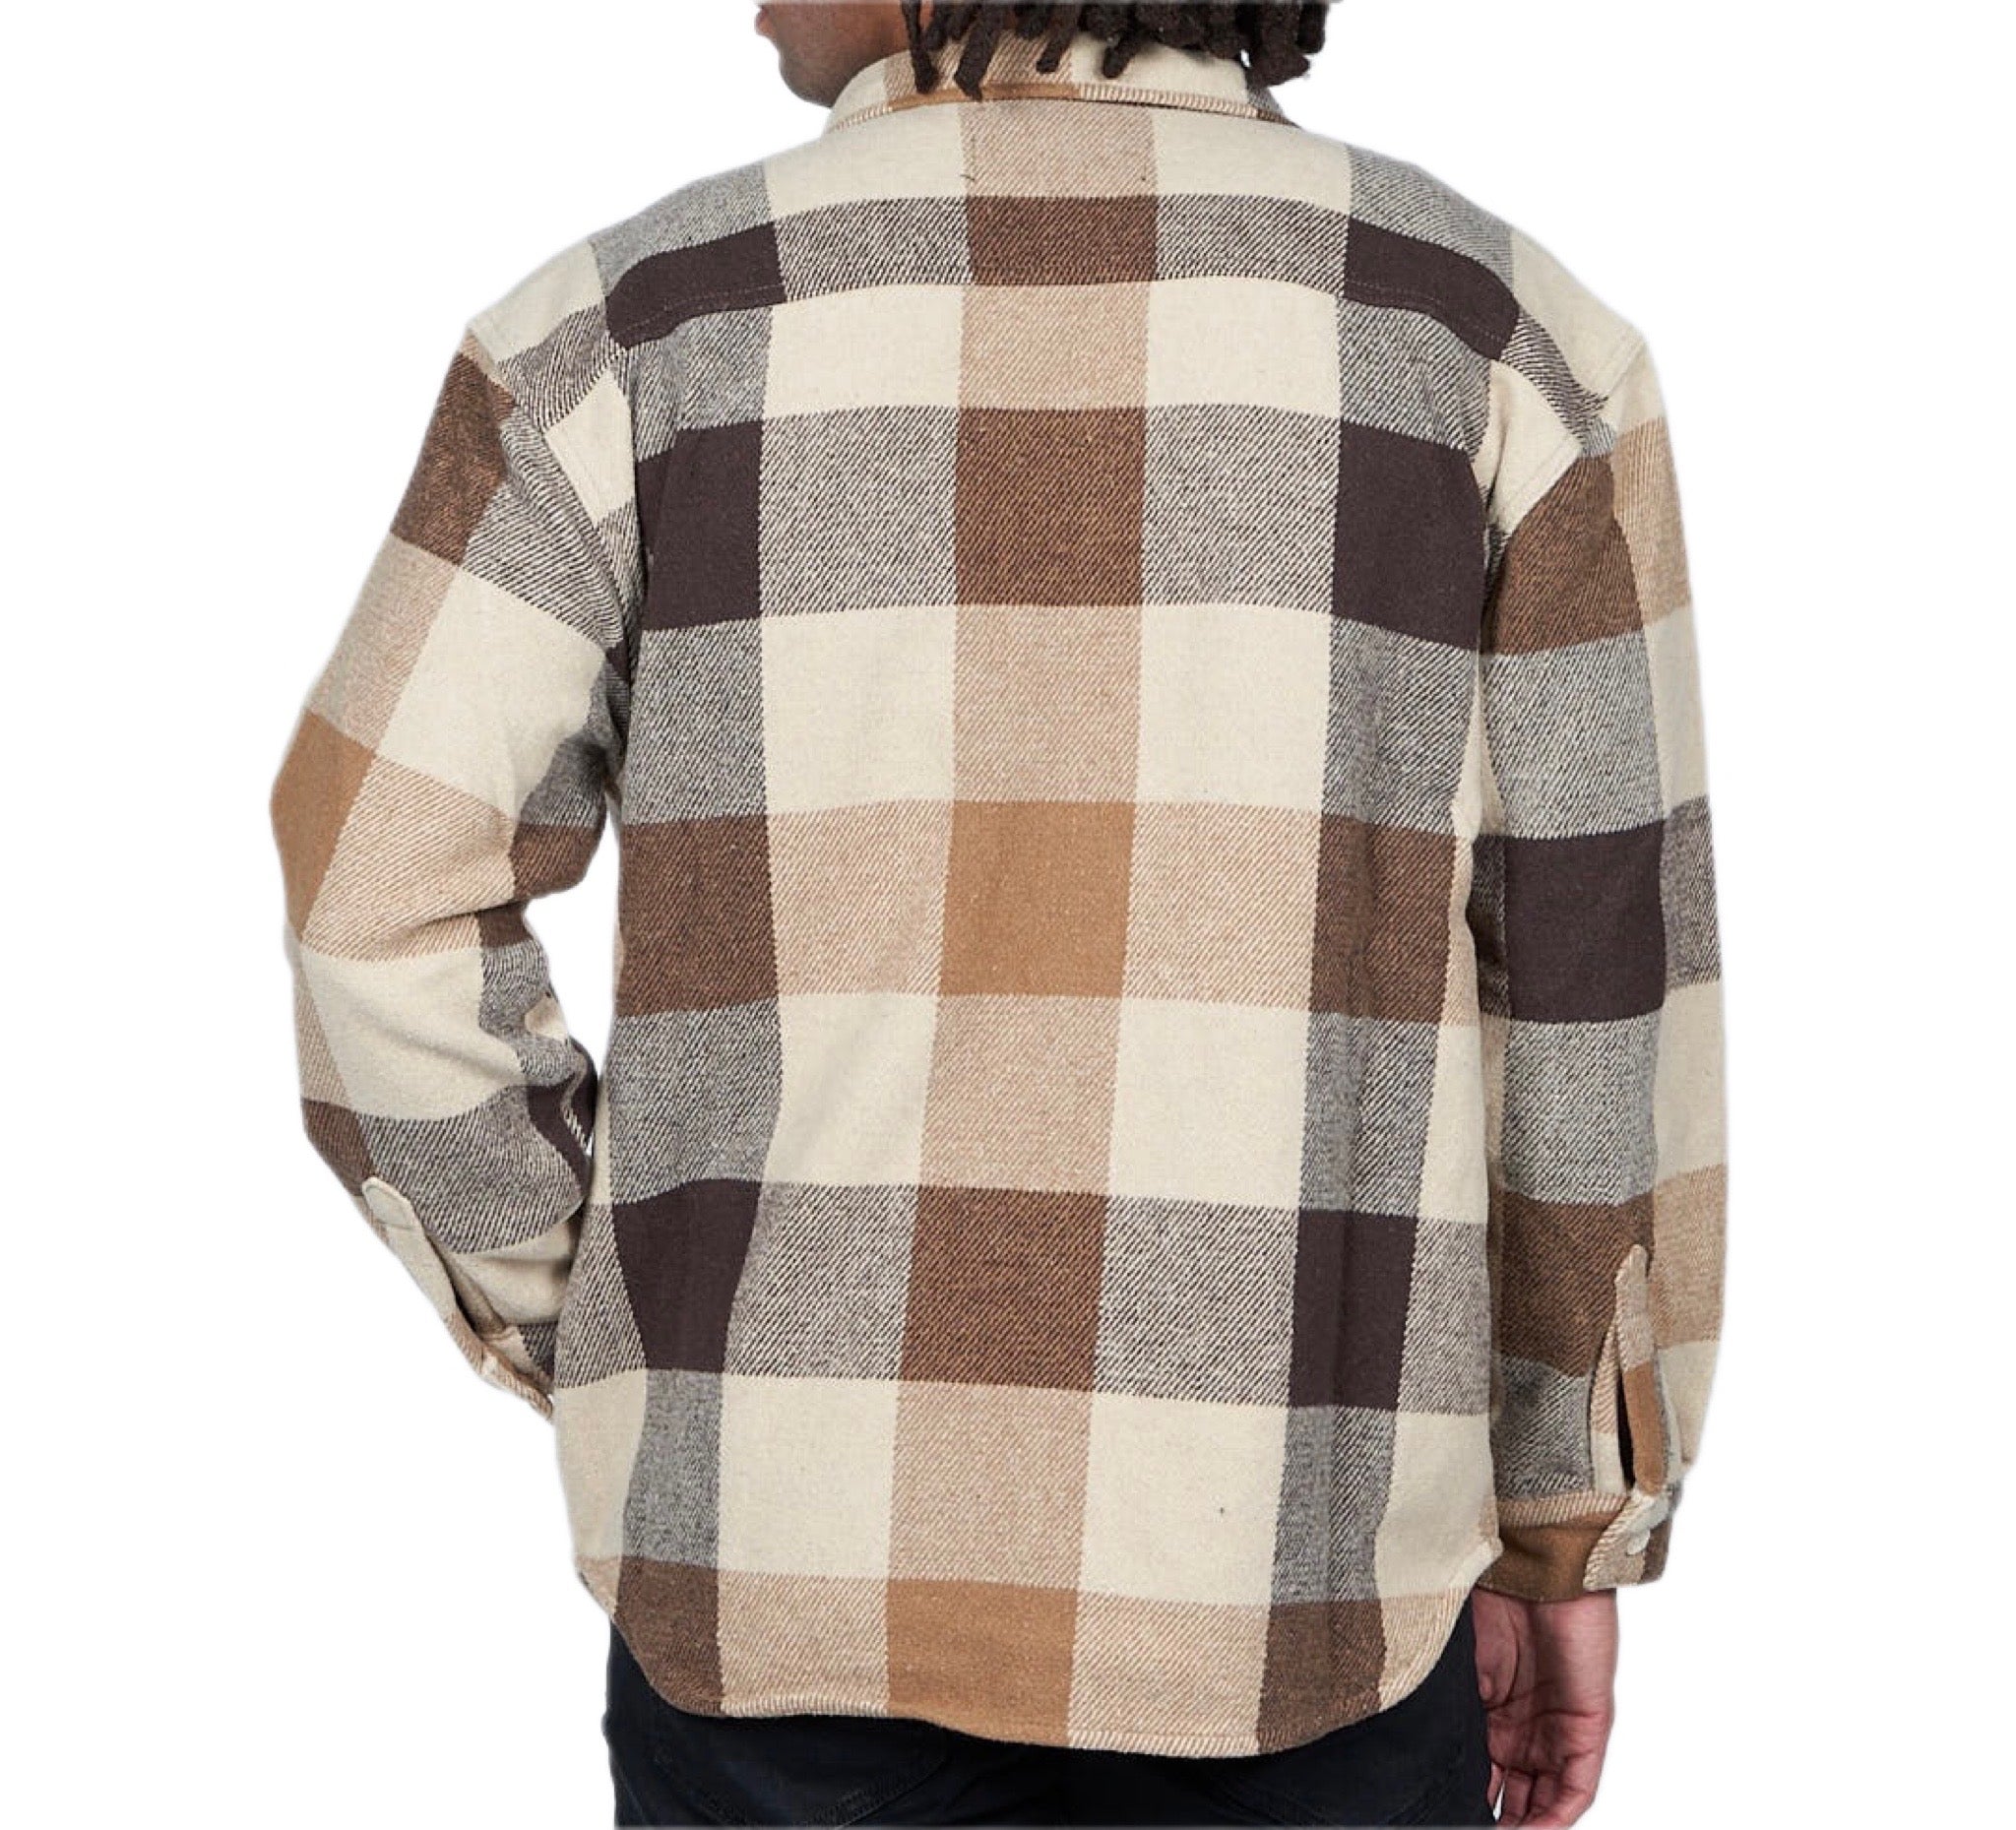 CALIBER FLANNEL BUTTON UP - BROWN